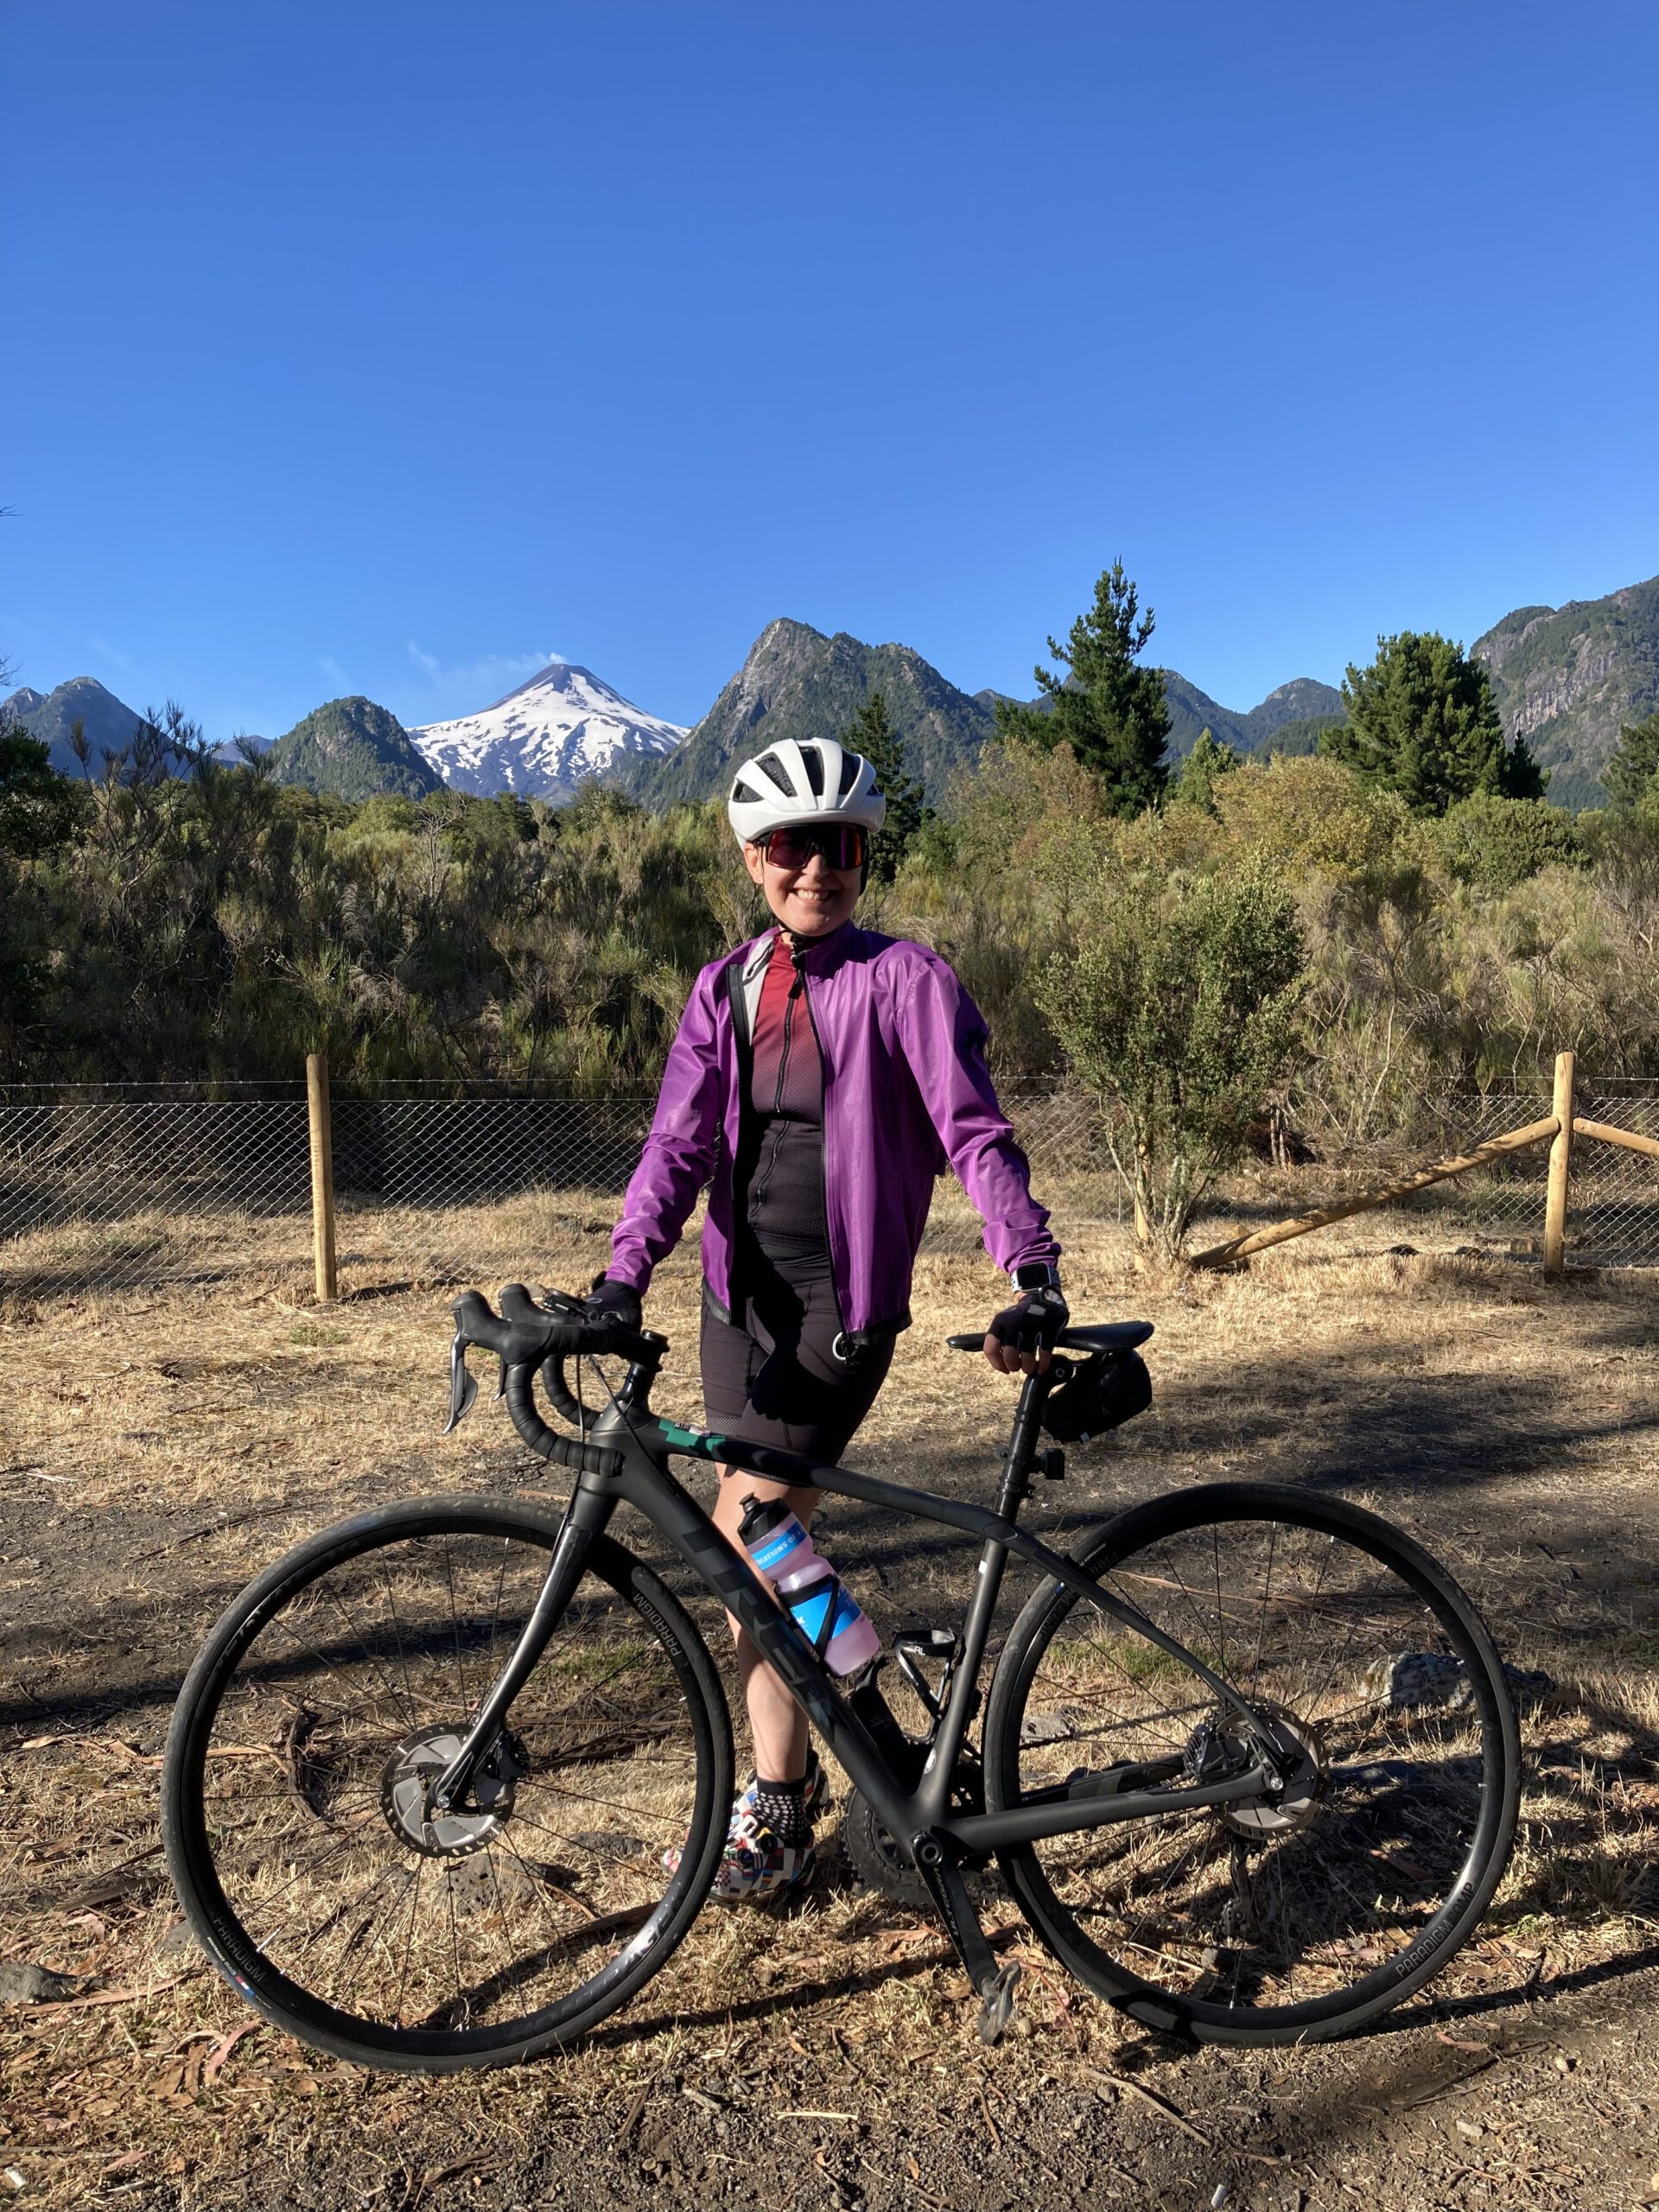 Cyclist posing with volcanoes in the background